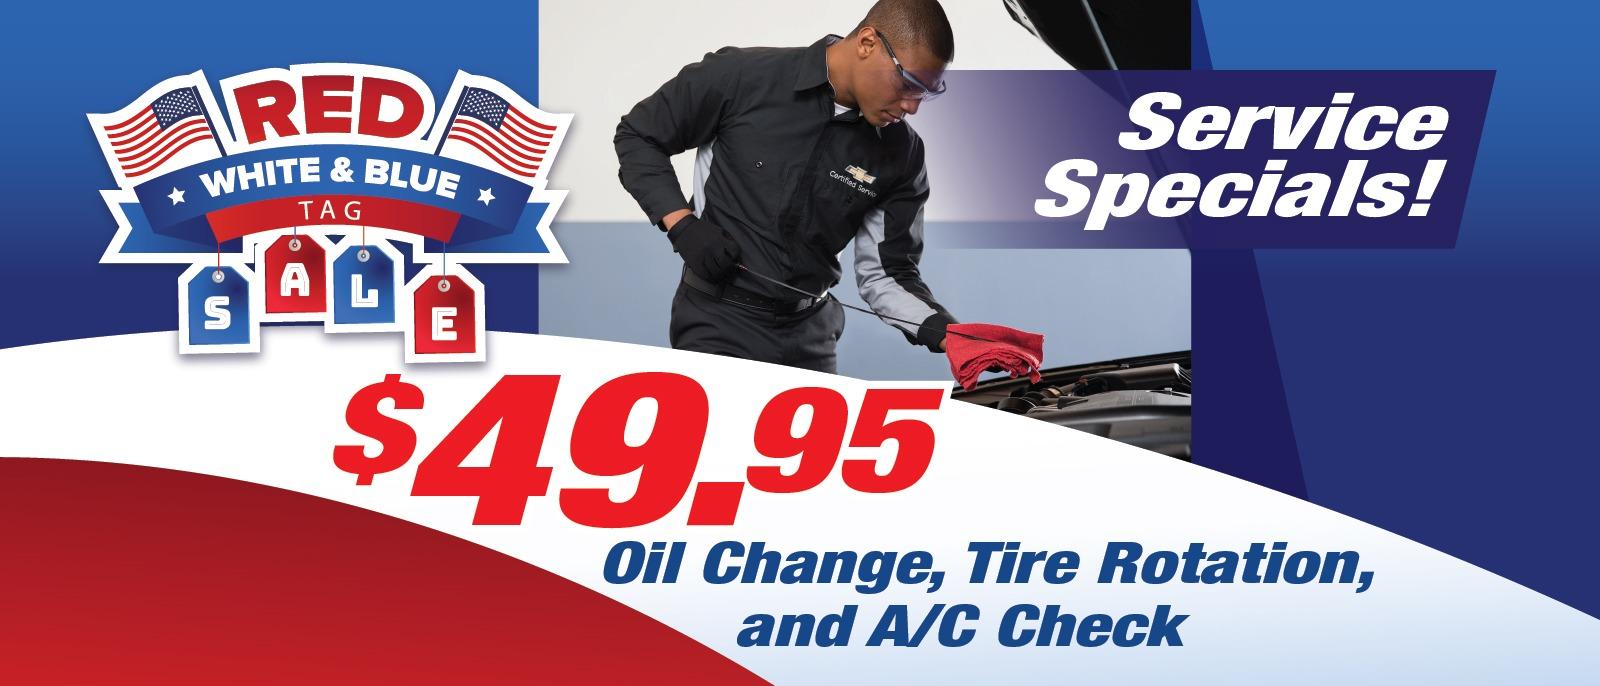 SERVICE SPECIALS! $49.95 OIL CHANGE, TIRE ROTATION, AND A/C CHECK